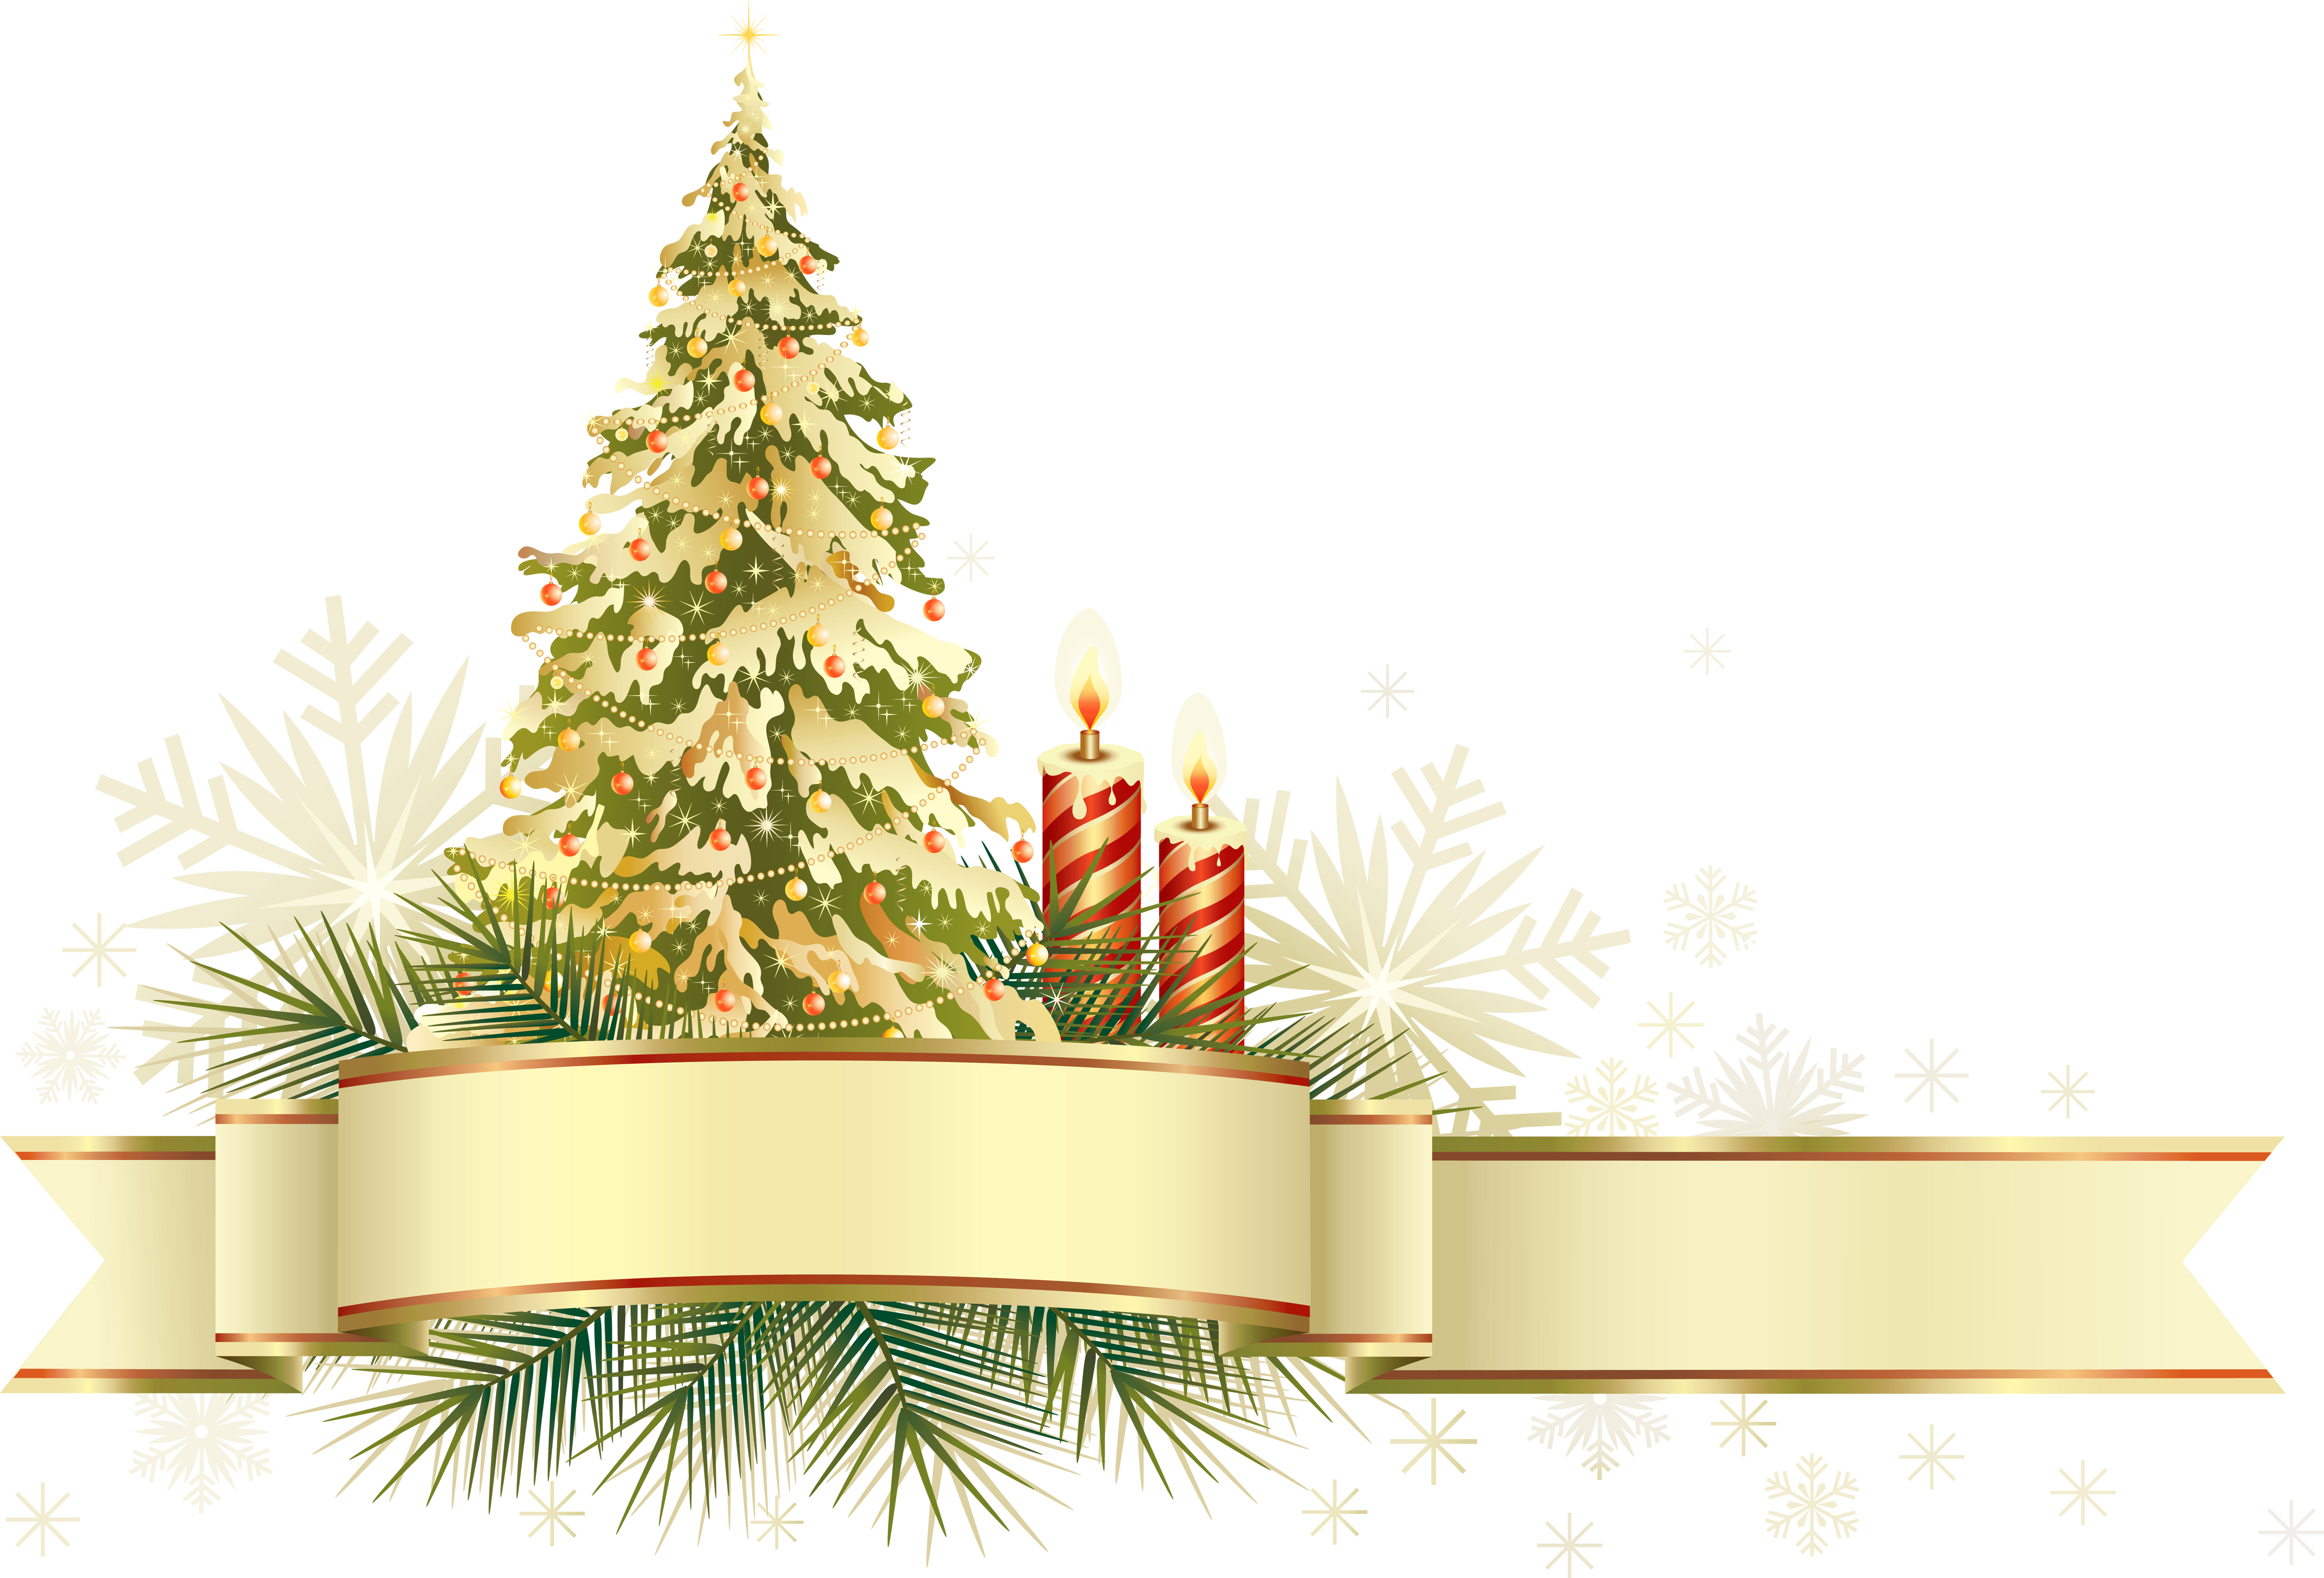 Christmas decorations clipart